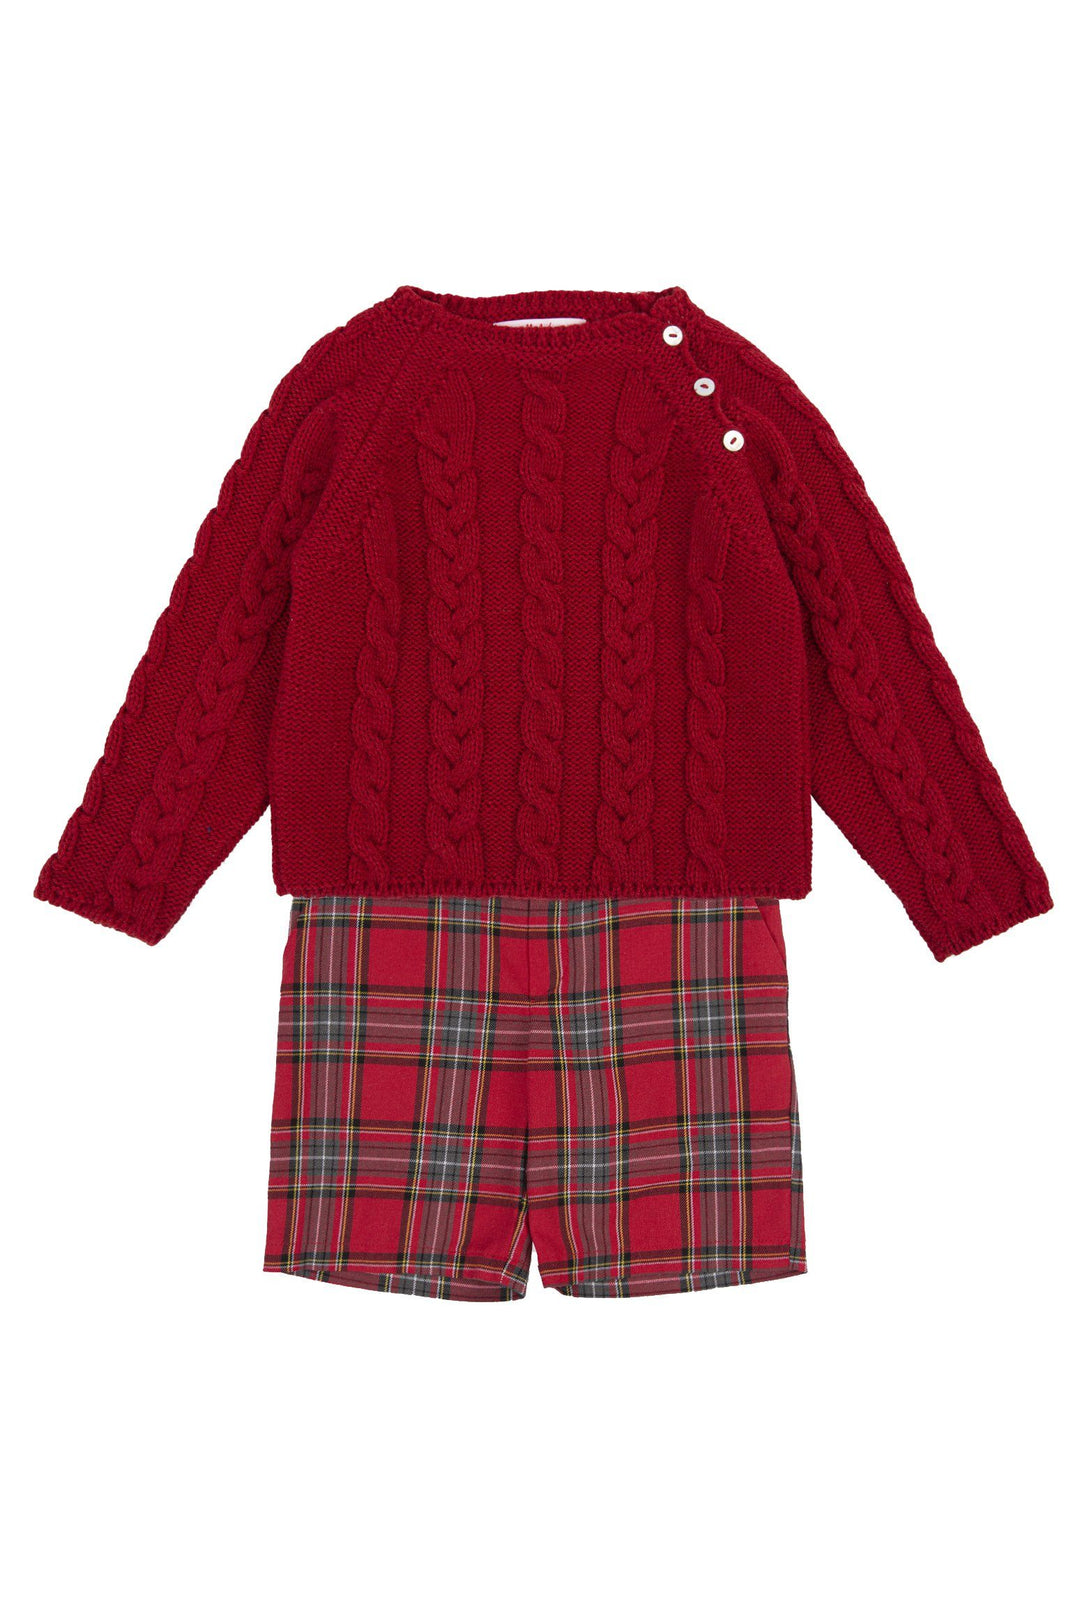 TUTTO PICCOLO AW20-21 GIRLS RED TARTAN DRESS & TIGHTS REF.: 9236 